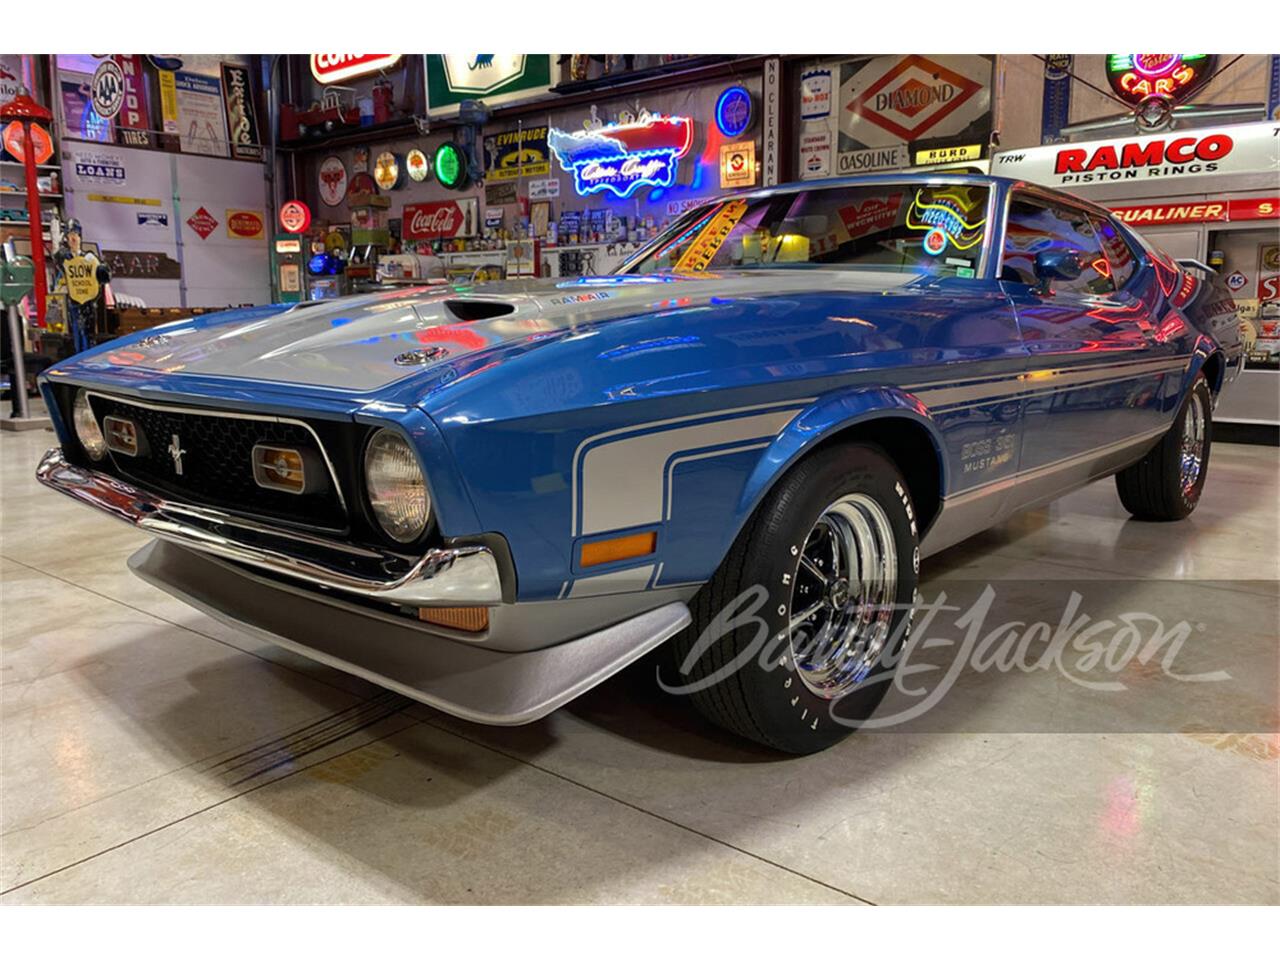 For Sale at Auction: 1971 Ford Mustang in Scottsdale, Arizona for sale in Scottsdale, AZ